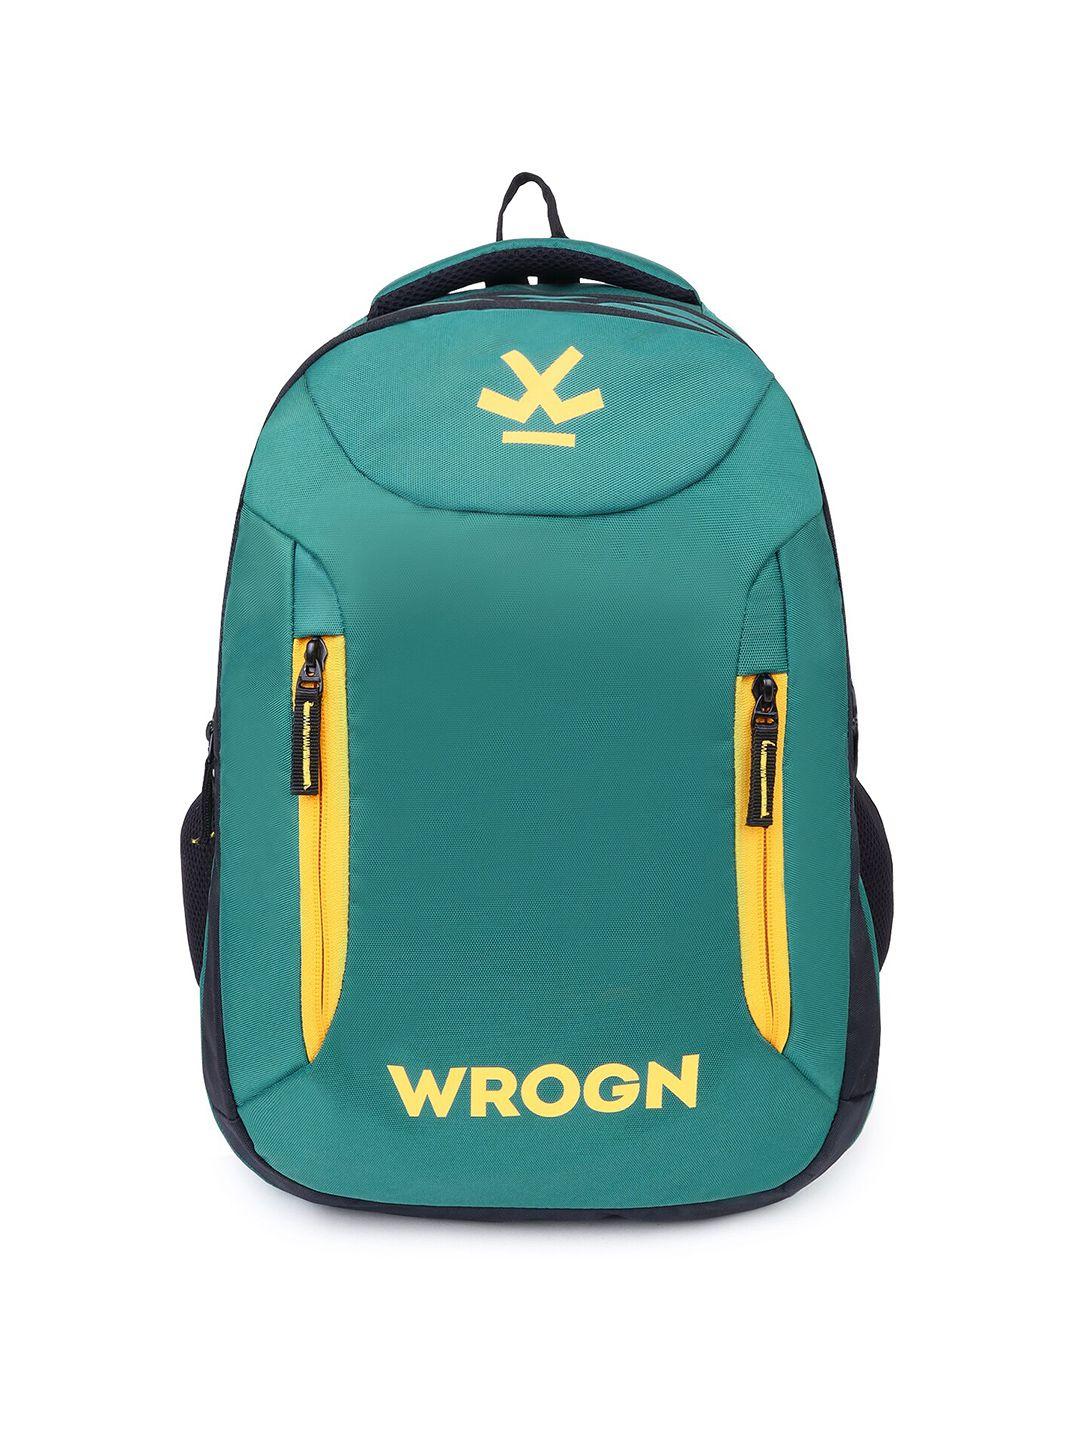 wrogn-water-resistant-brand-logo-backpack-with-shoe-pocket